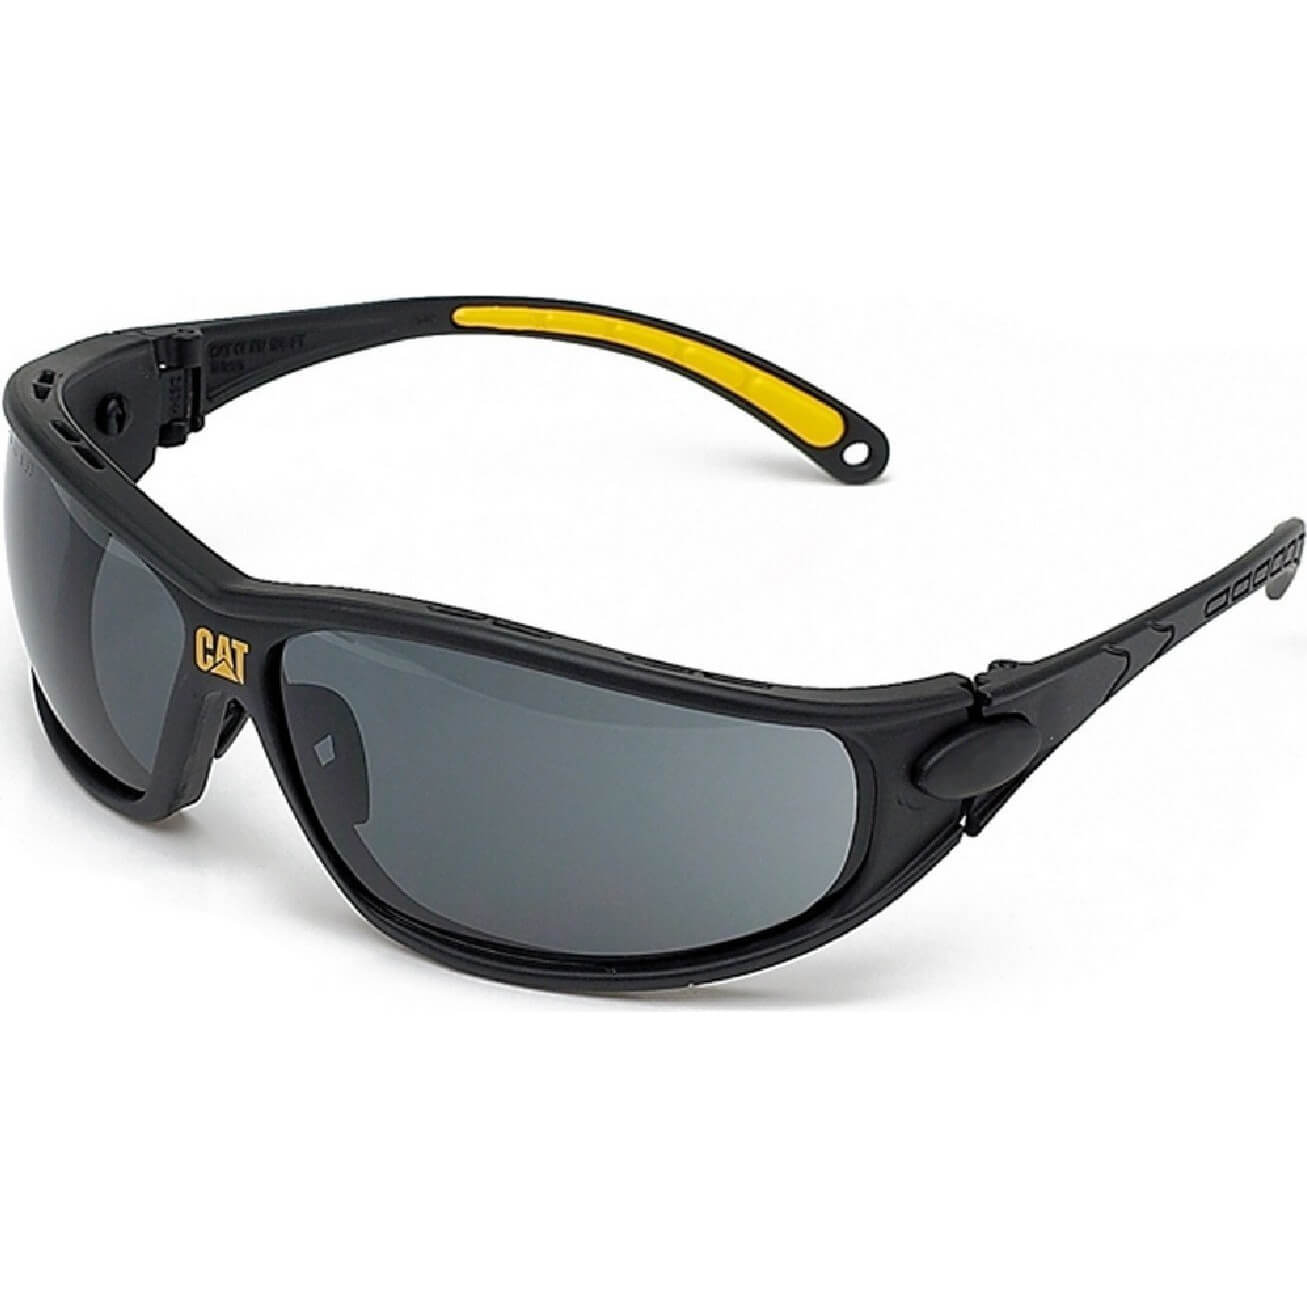 Image of Caterpillar Tread Protective Safety Glasses Smoke